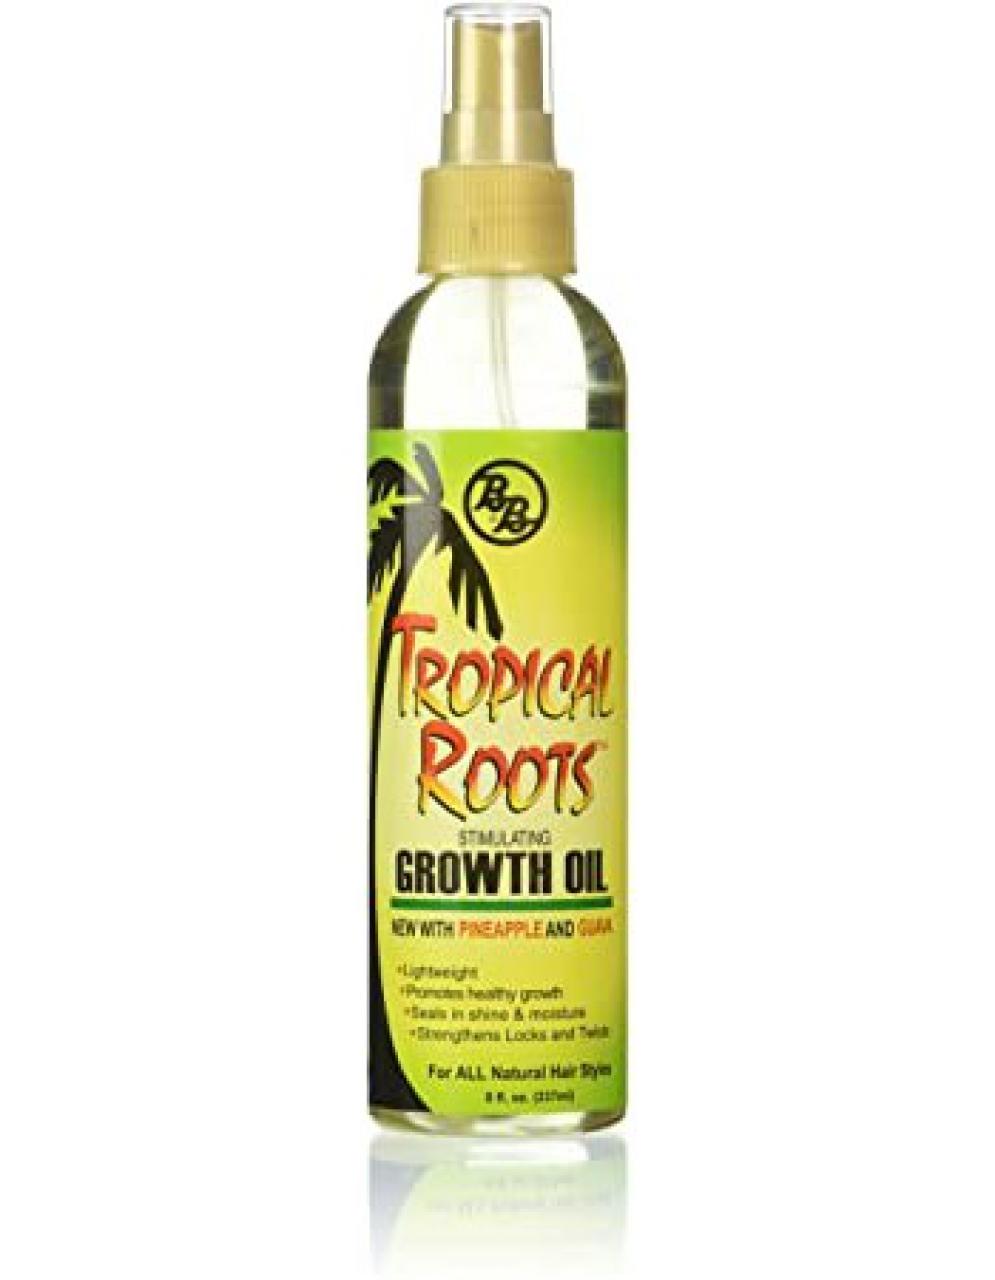 Tropical roots growth oil